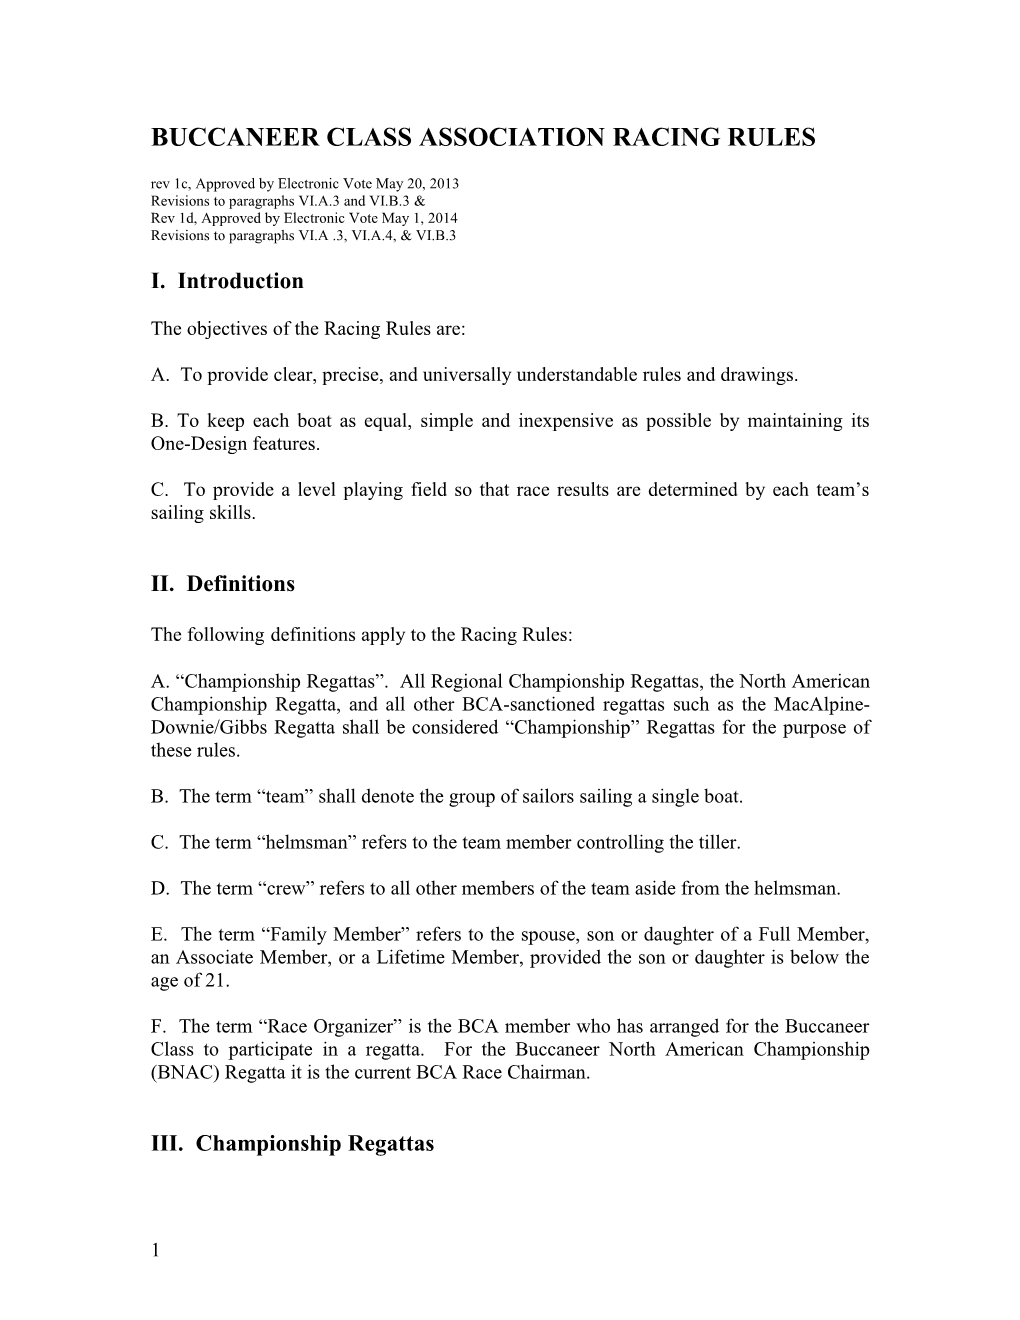 Racing Rules, Rev 1C, Voted May 20, 2013